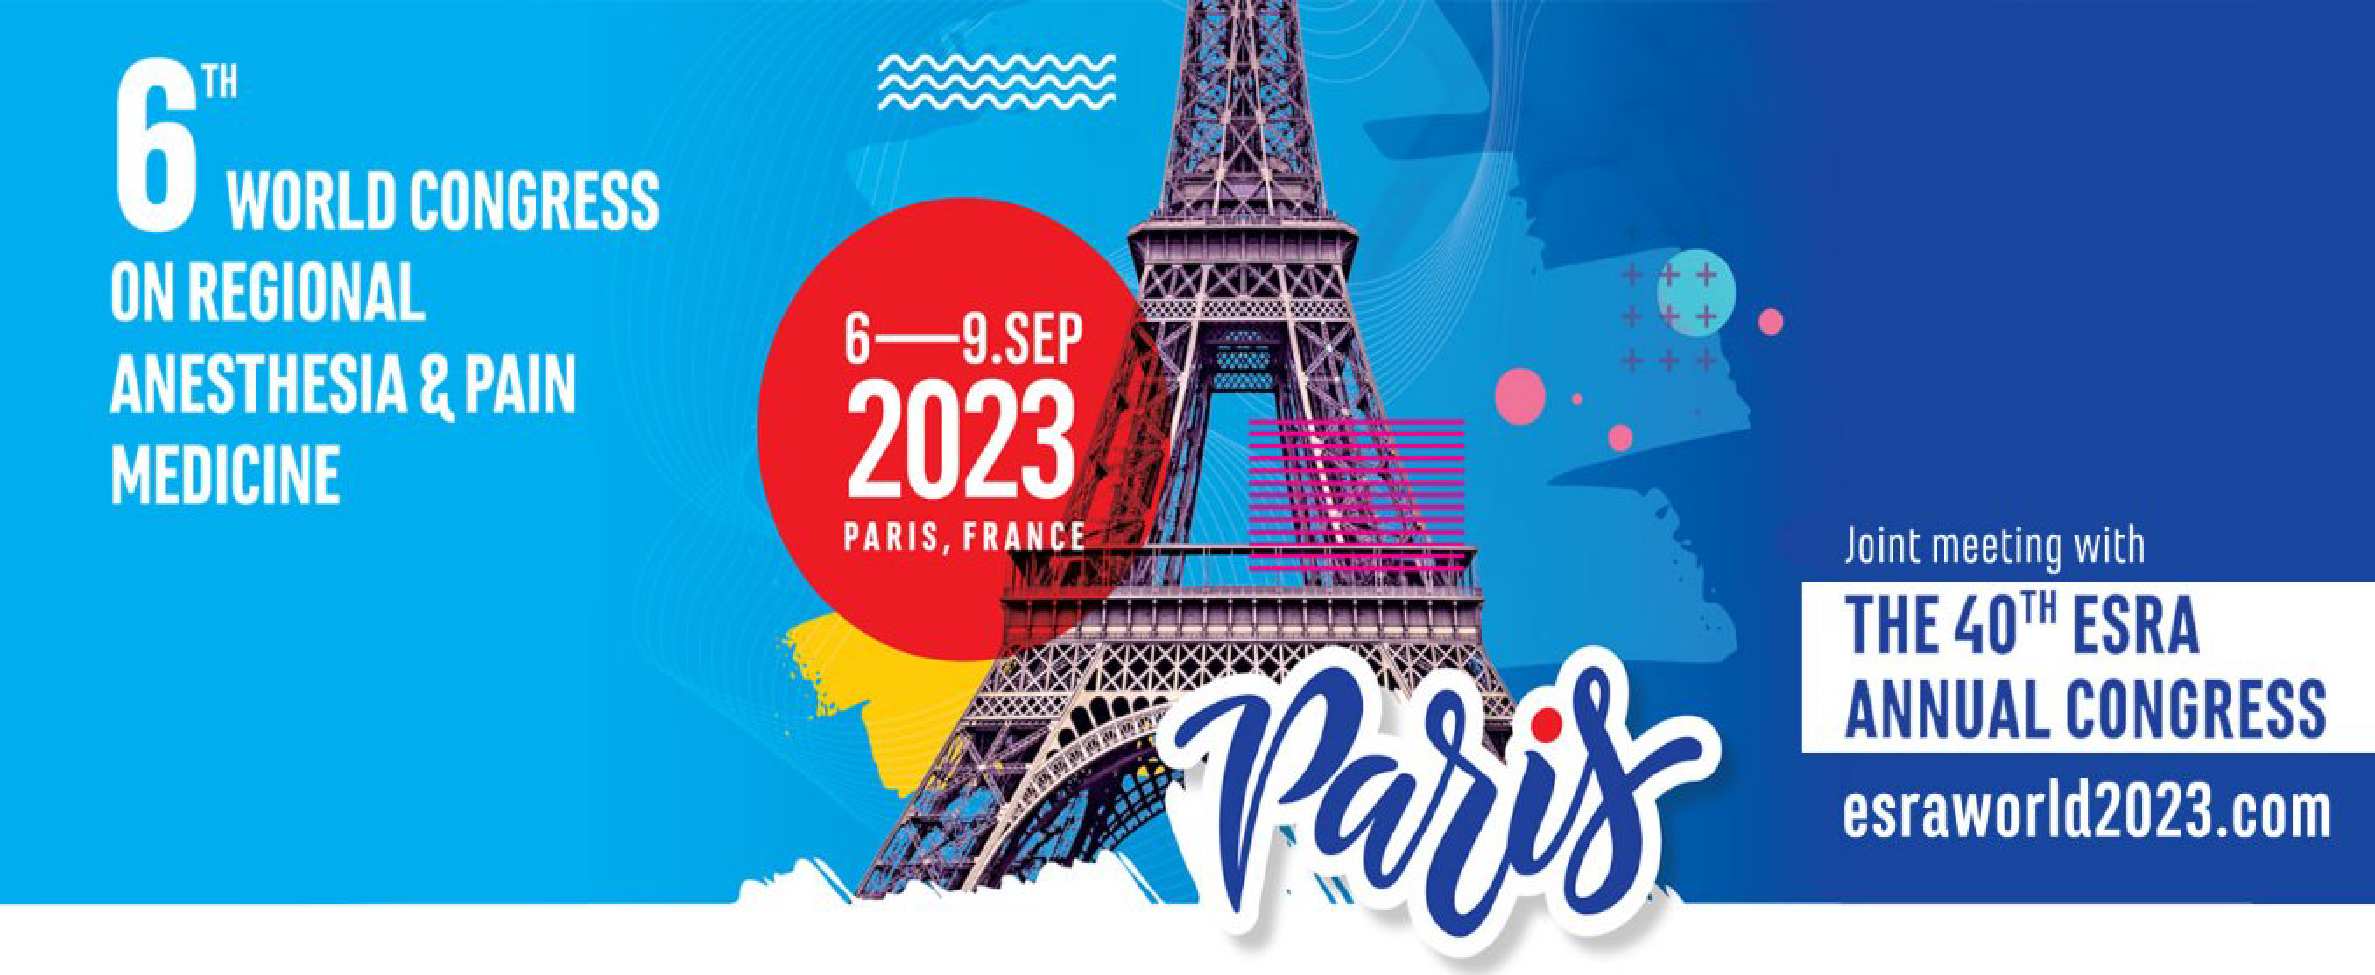 The 6th World Congress on Regional Anaesthesia and Pain Medicine - ESRA 2023